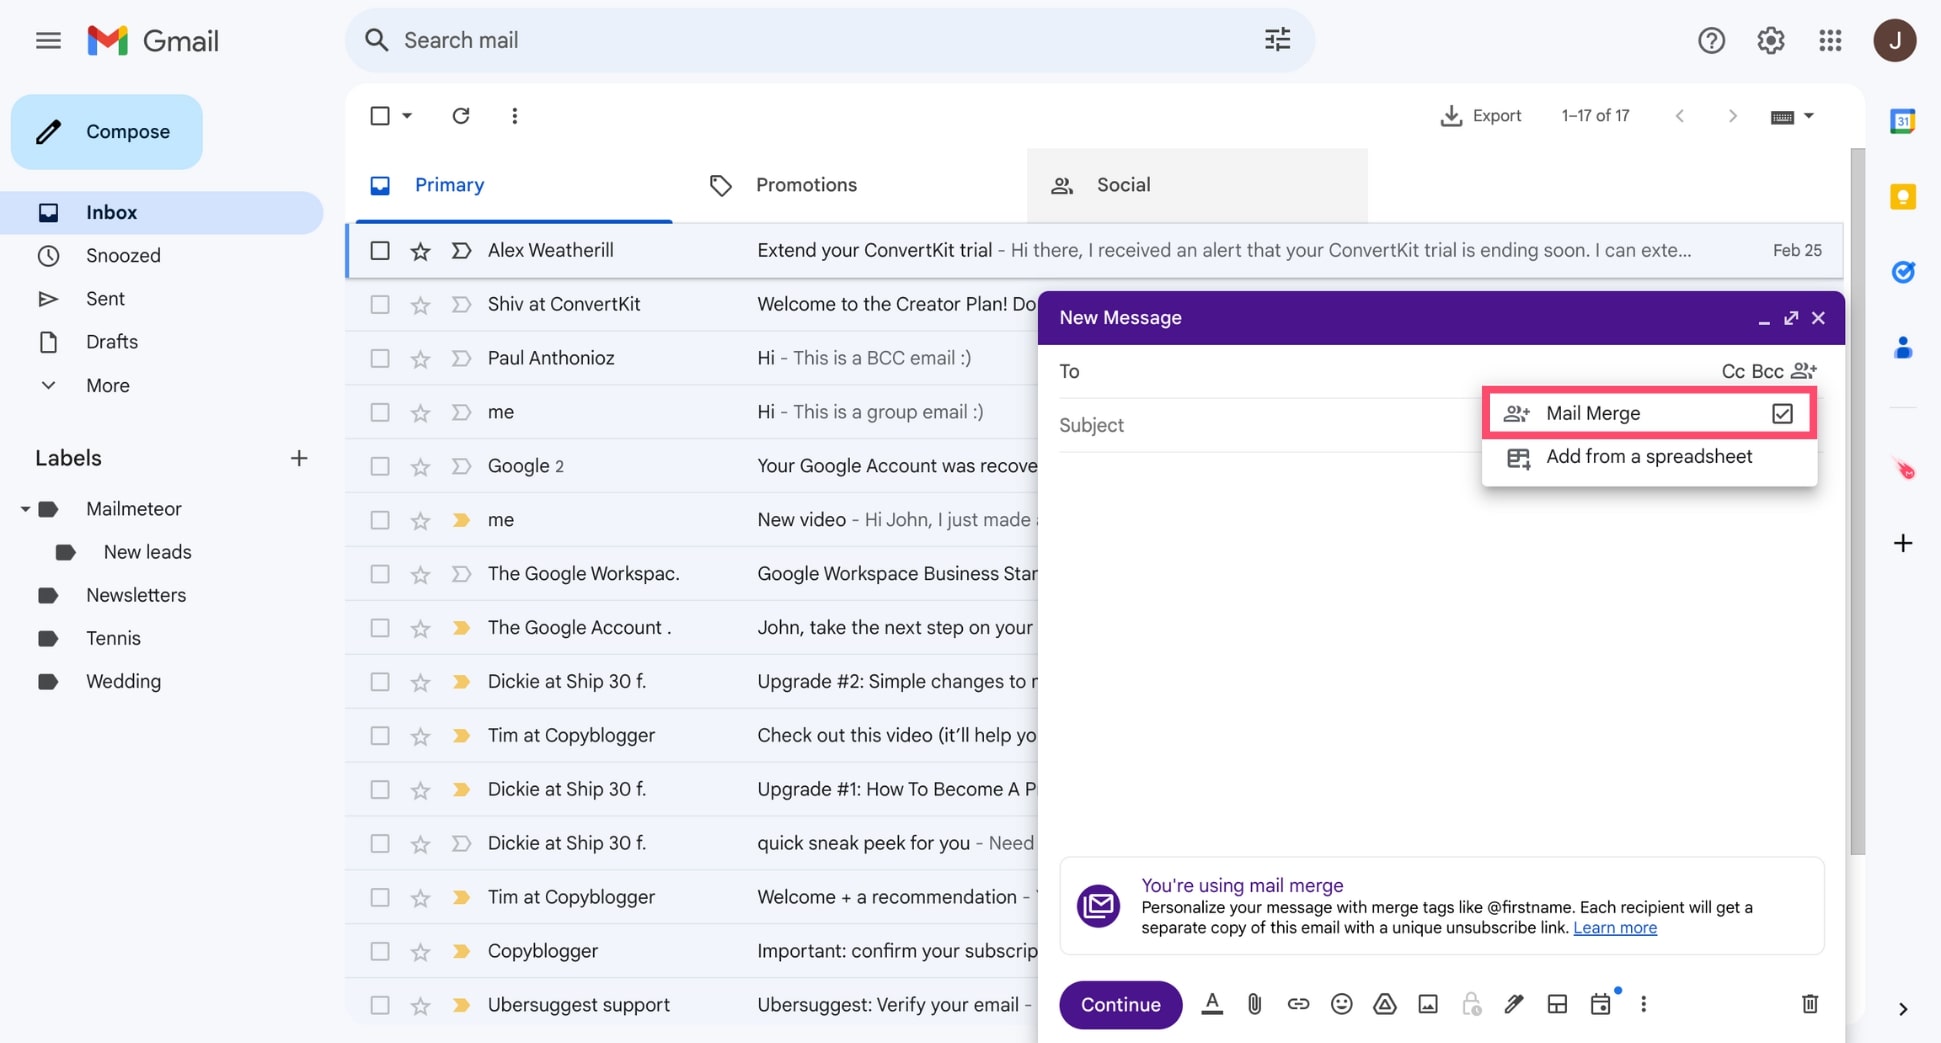 Activate the mail merge feature in Gmail